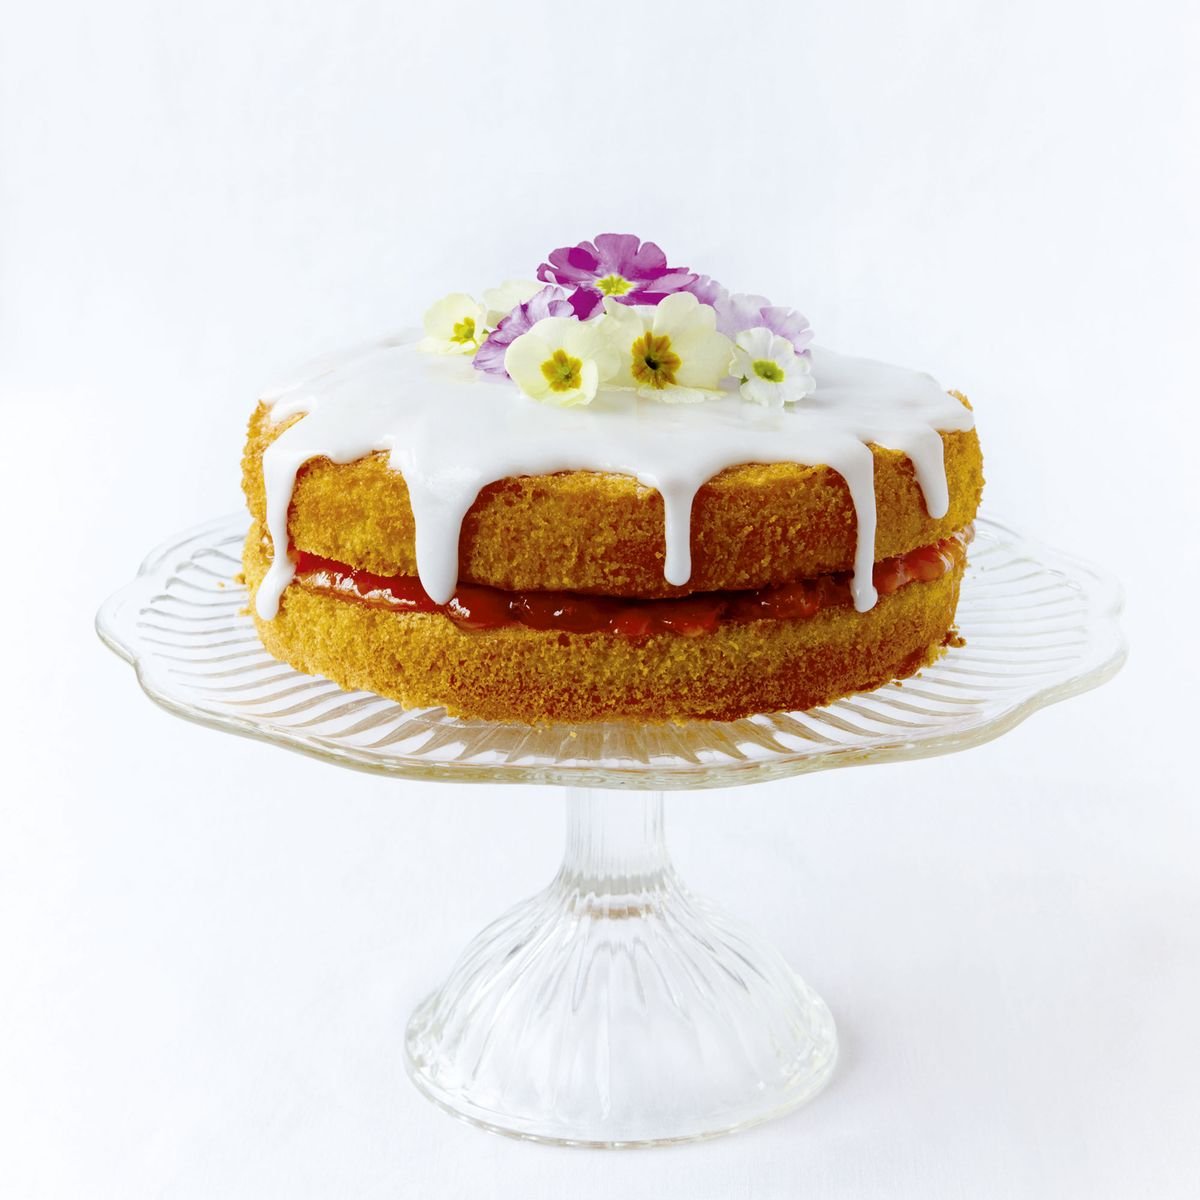 Try this brilliant Easter recipe for a gluten free Easter cake filled with apricot and raspberries